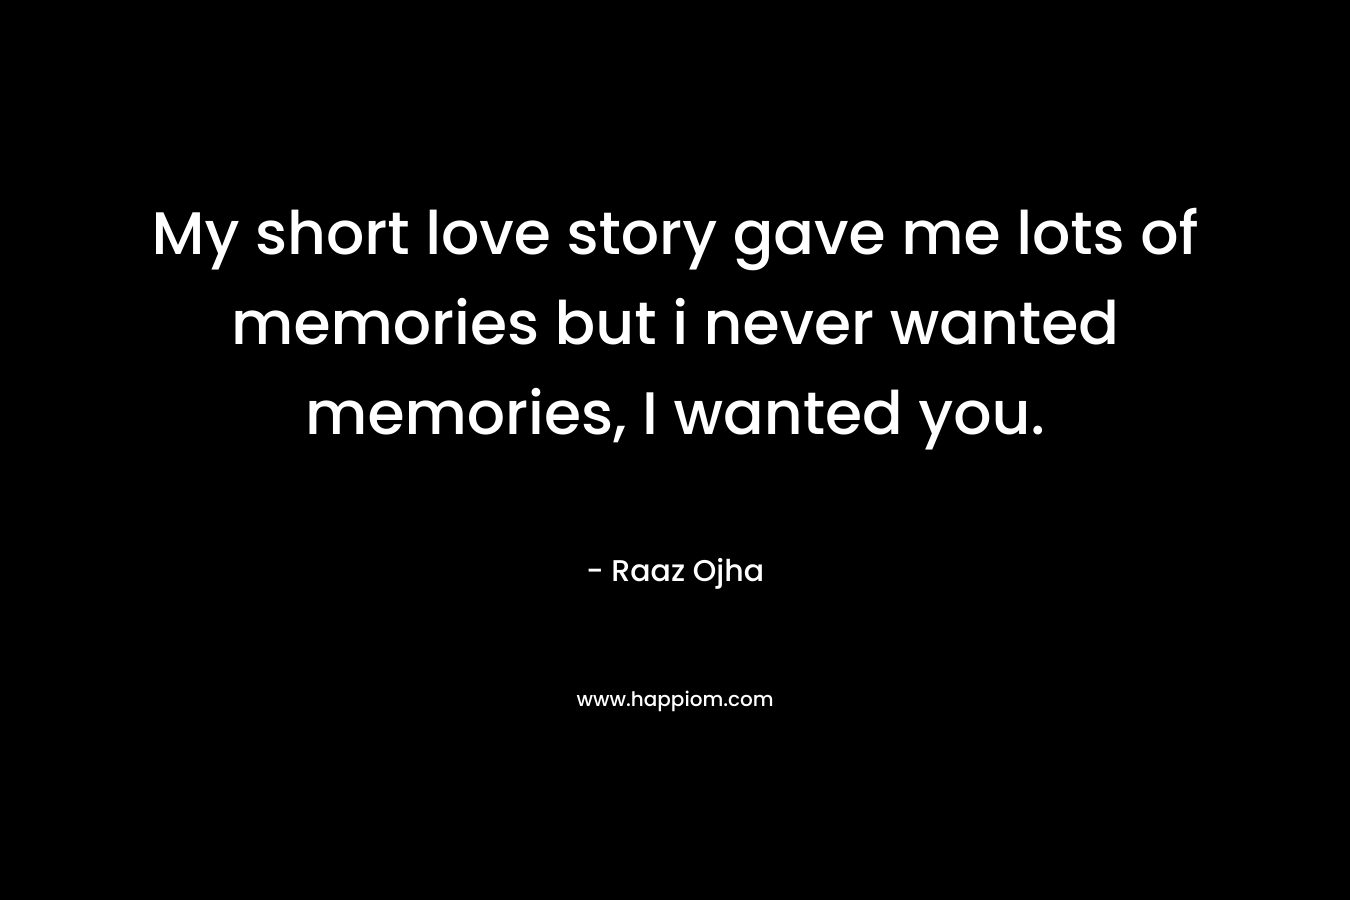 My short love story gave me lots of memories but i never wanted memories, I wanted you.